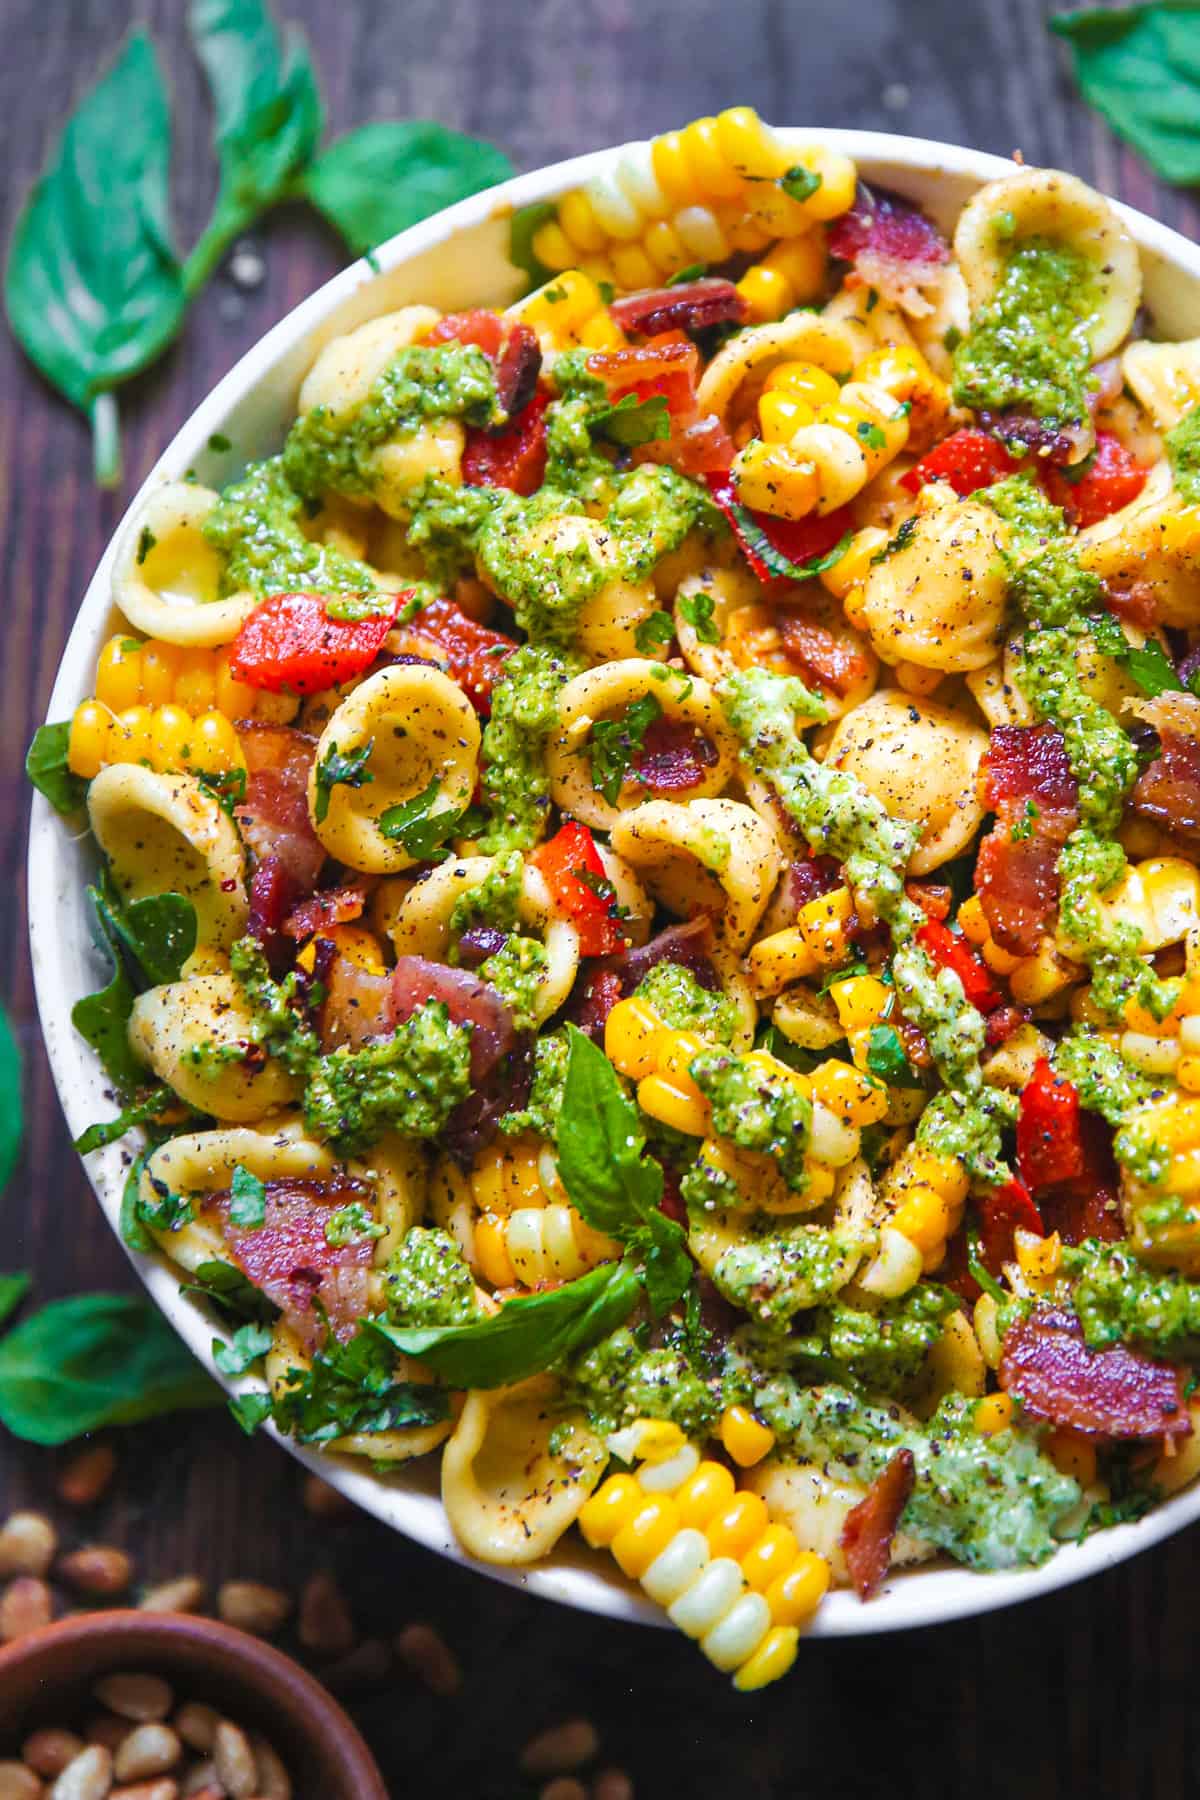 Summer Pasta Salad with Corn, Bell Pepper, Bacon, and Creamy Pesto Dressing - Pasta Salad Recipes